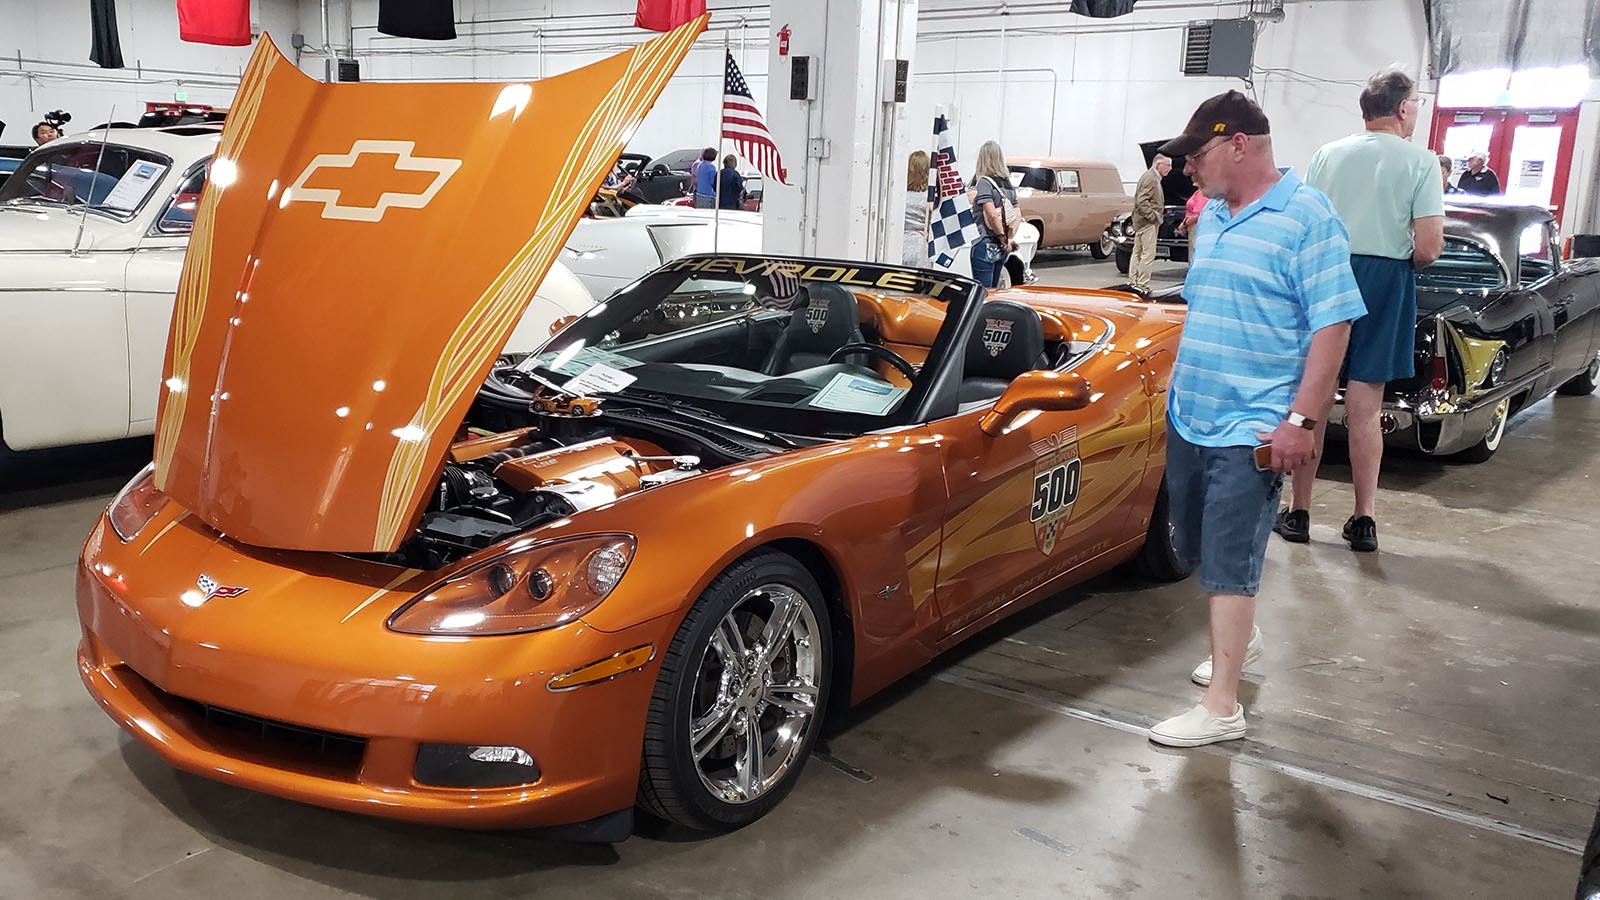 This 2007 Corvette Indy 500 owned by Steve Melius was getting some attention during the Cars, Cigars and Guitars event.